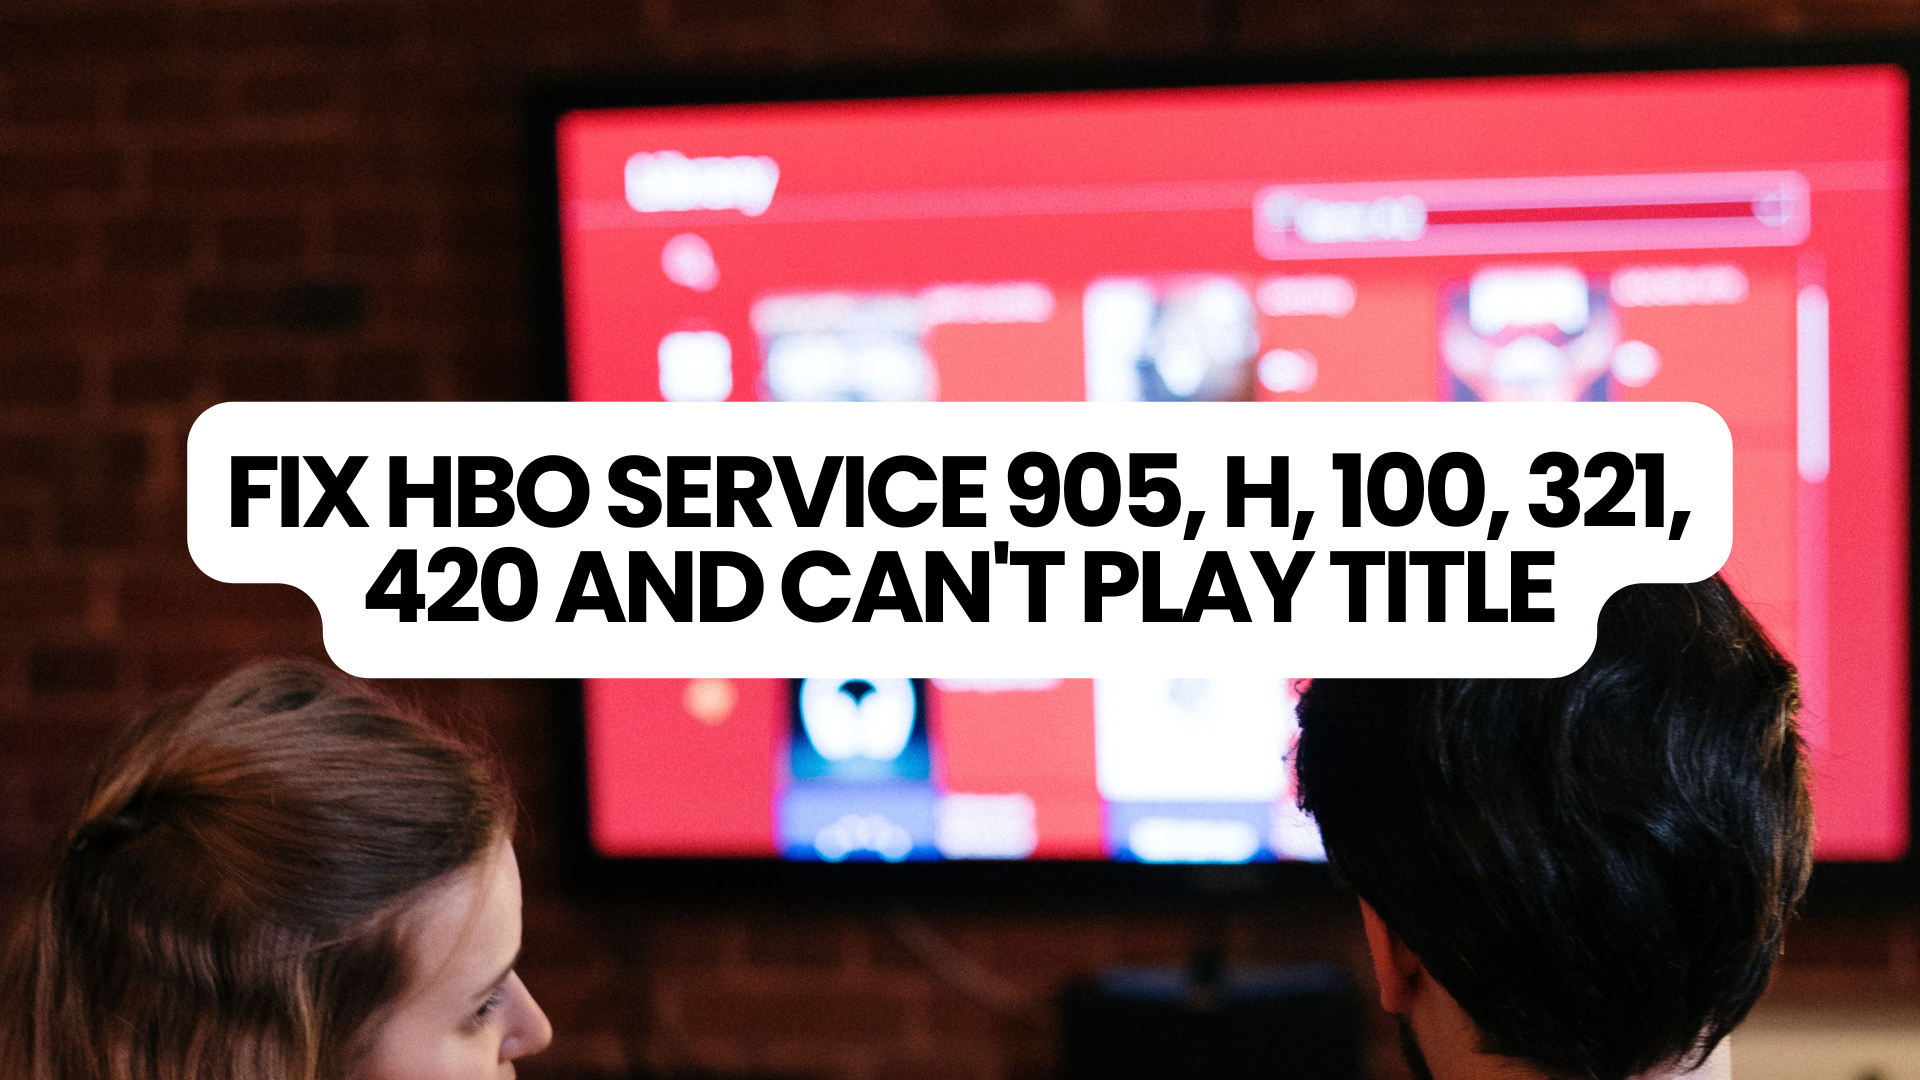 Fix HBO Service Codes 905, H, 100, 321, 420 and Can't Play Title